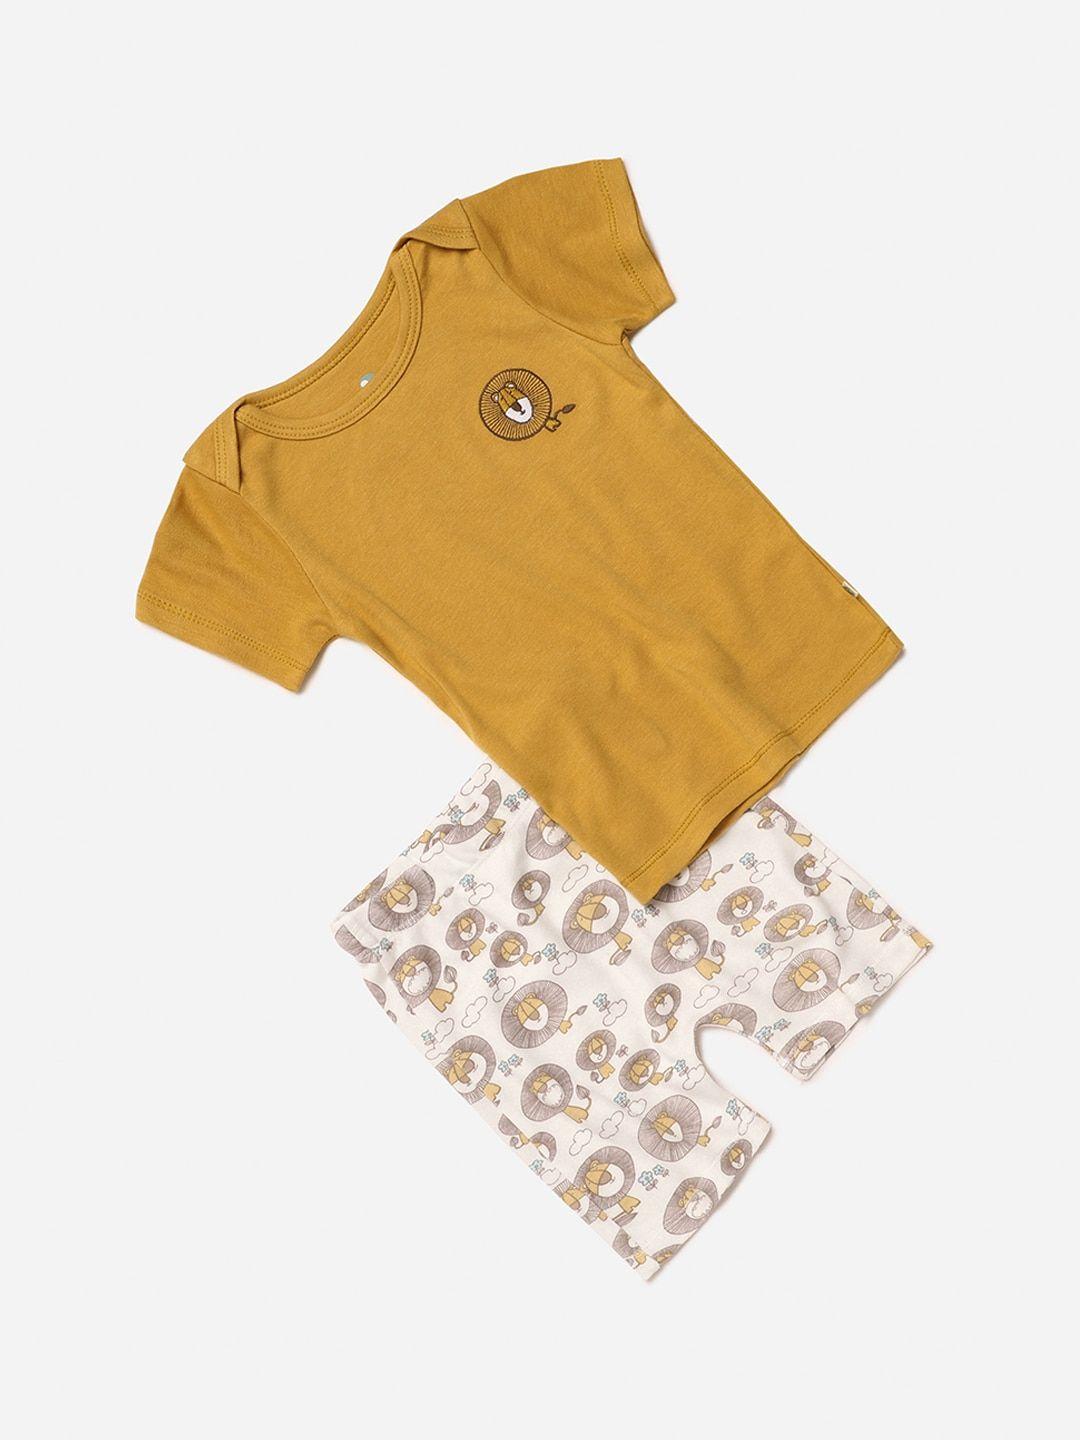 cocoon care kids mustard yellow & white printed bamboo t-shirt with shorts